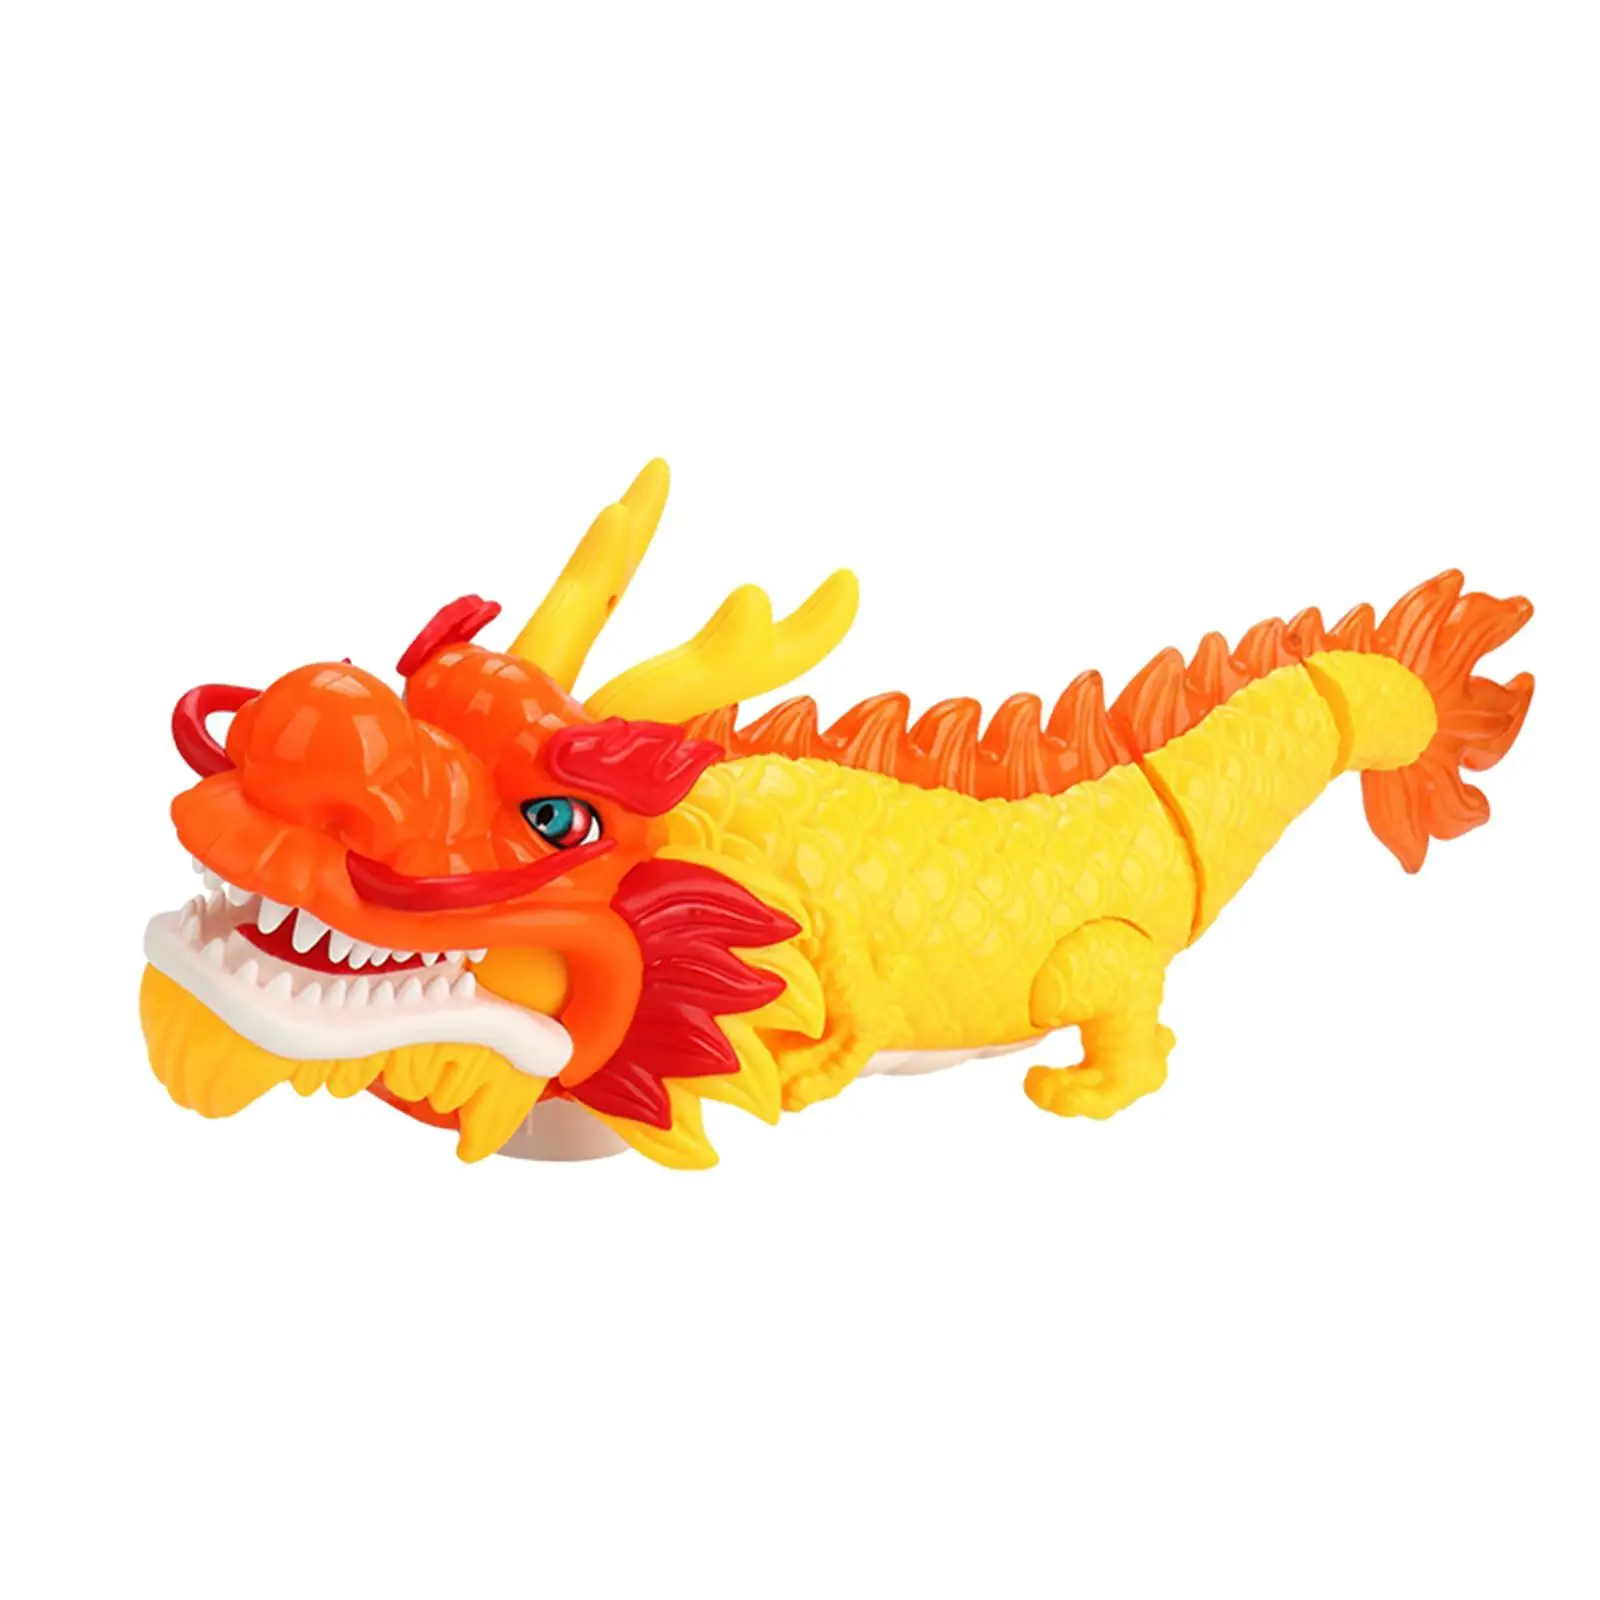 Eletric Dragon Toy Animal Mechanical High Simulation Creative Outdoors Gifts Flexible for Girls Children Boys Adults Age 8-12